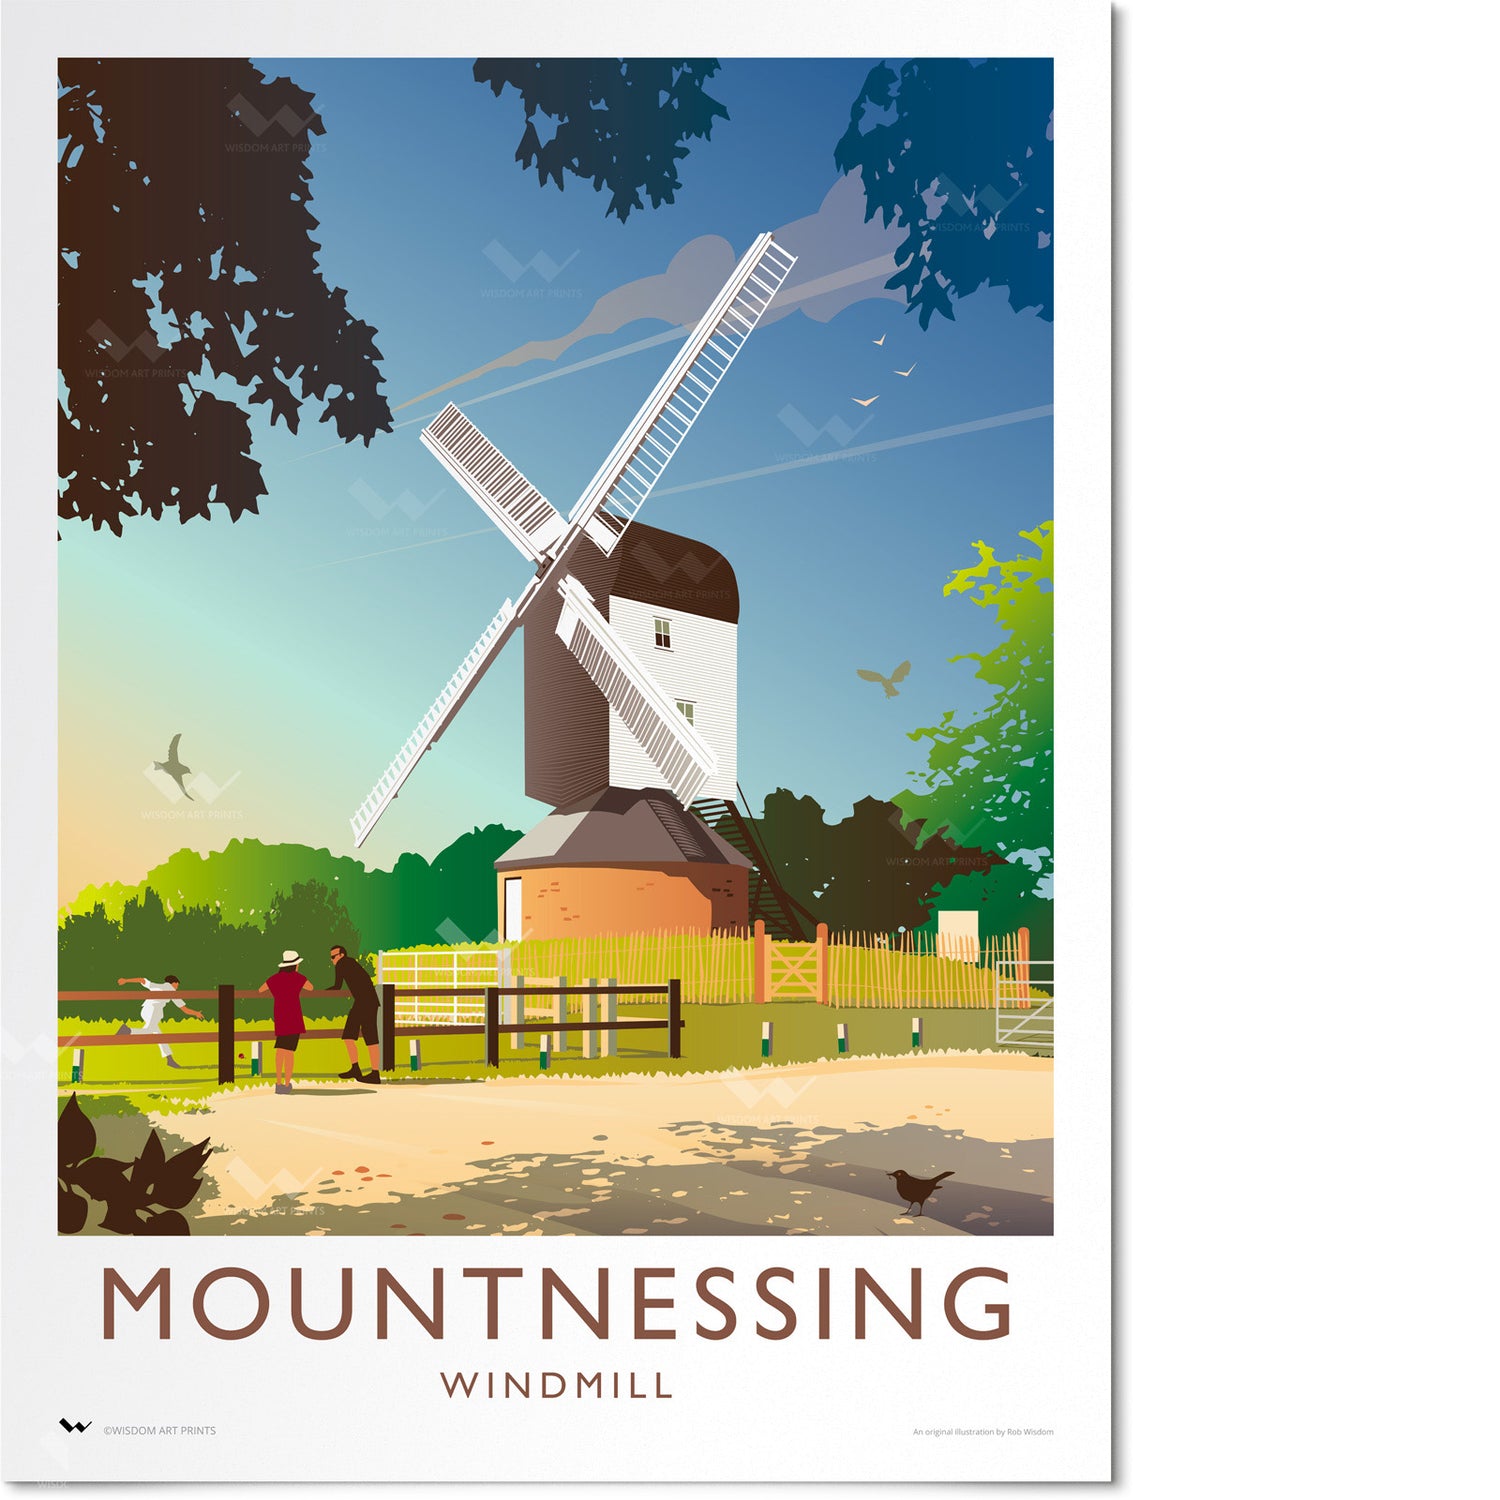 Mountnessing Windmill Travel Poster